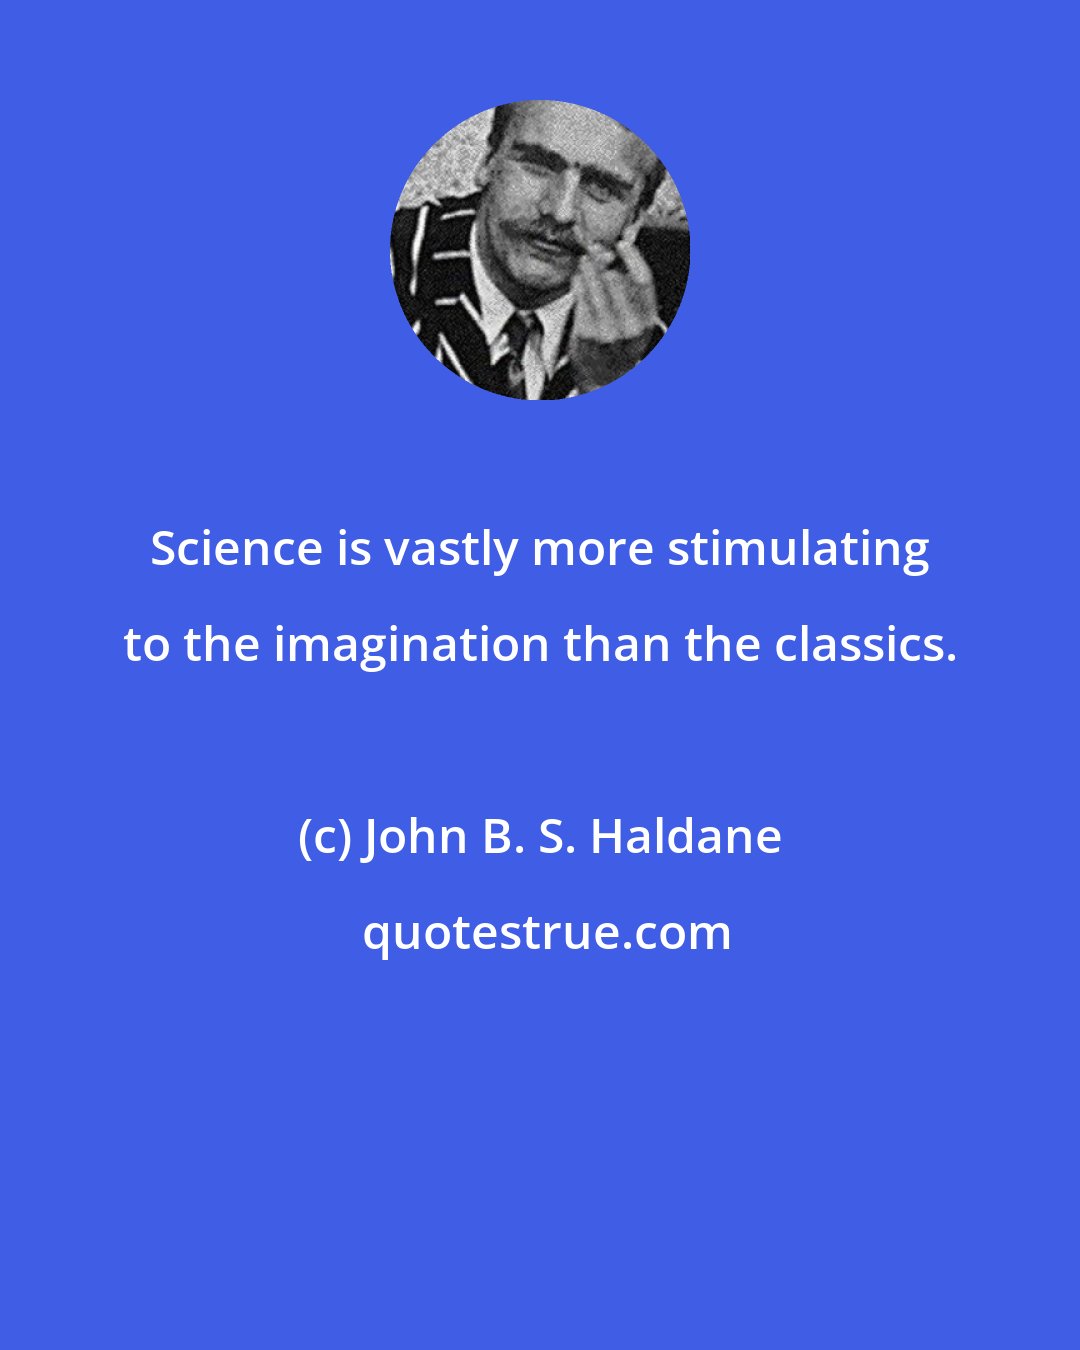 John B. S. Haldane: Science is vastly more stimulating to the imagination than the classics.